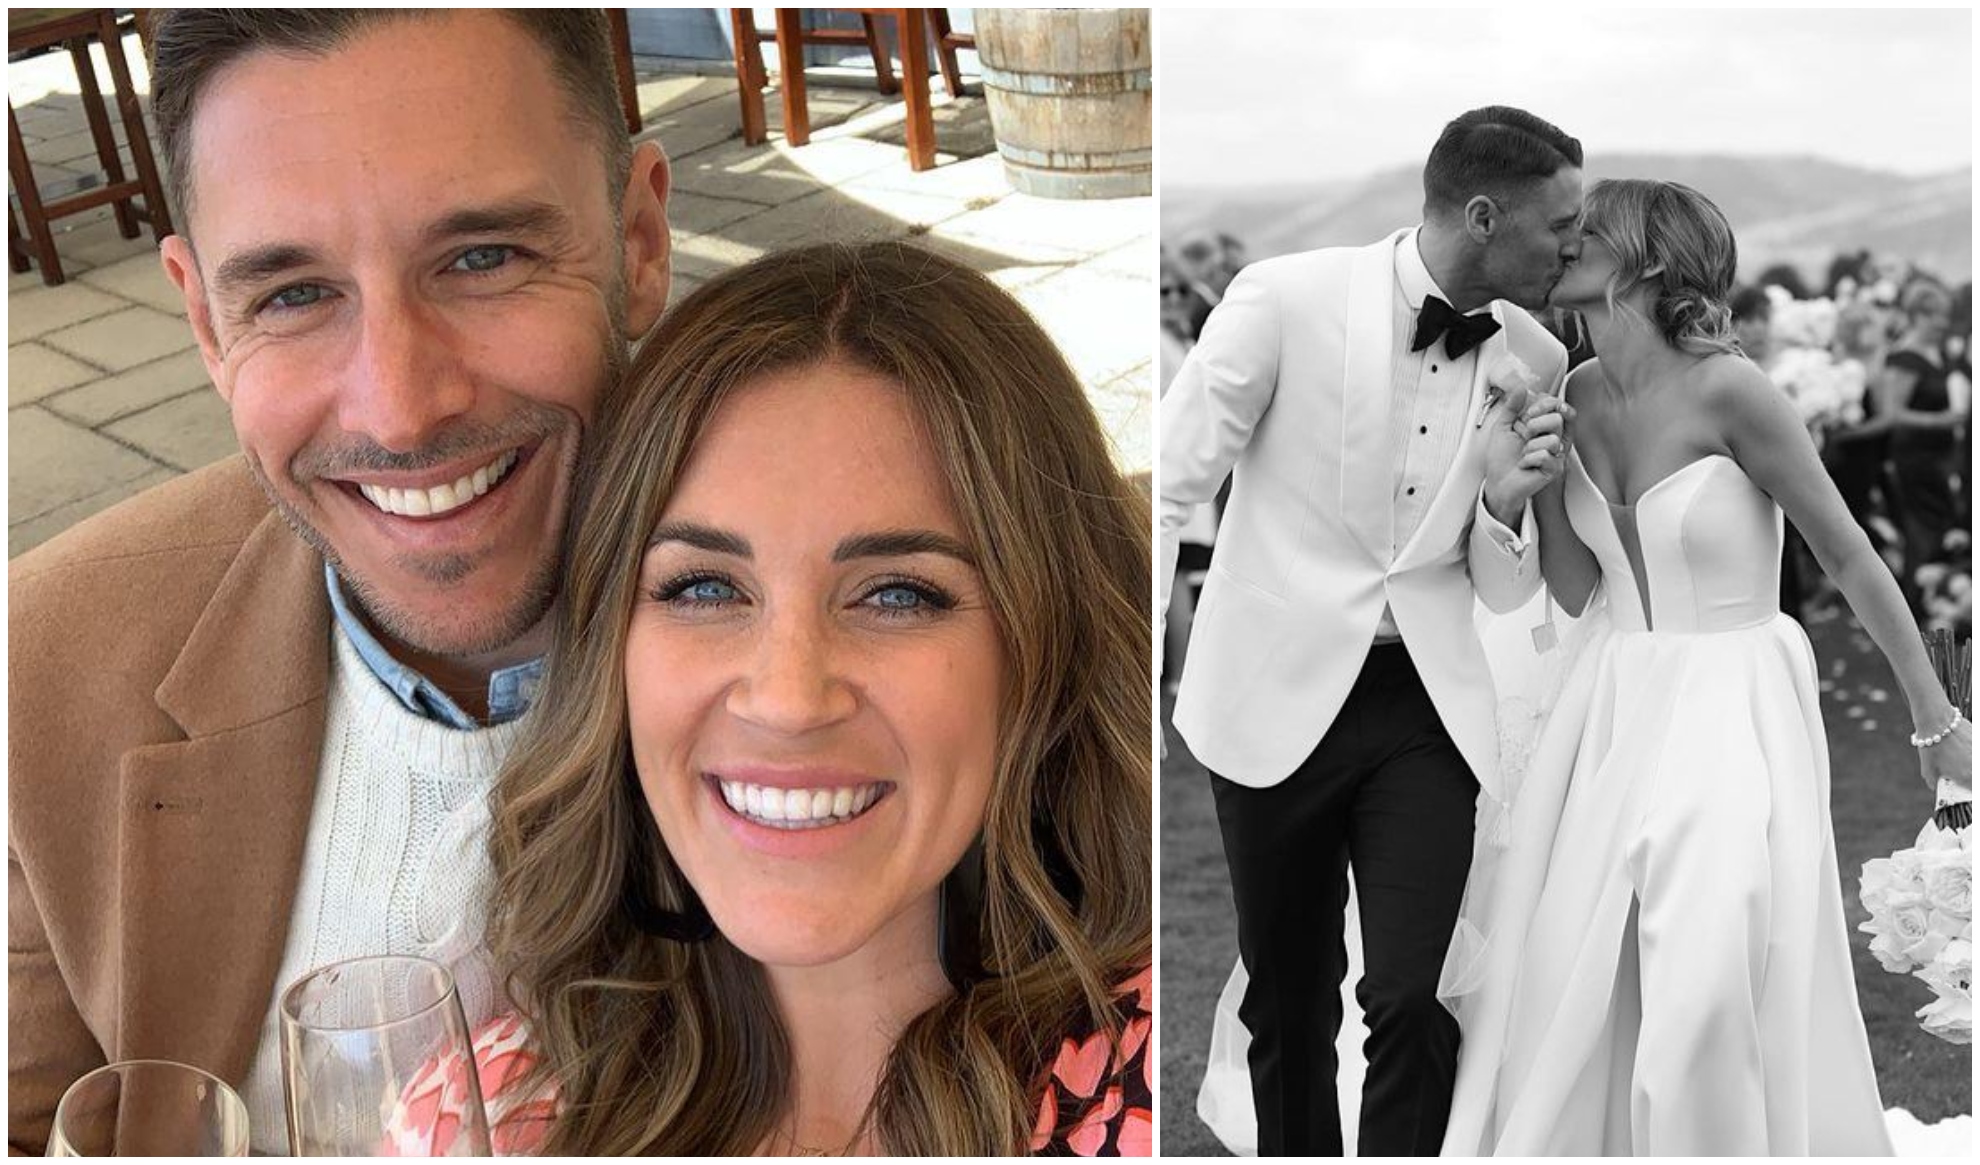 Georgia Love and Lee Elliott have finally tied the knot in a glorious, pun-filled wedding